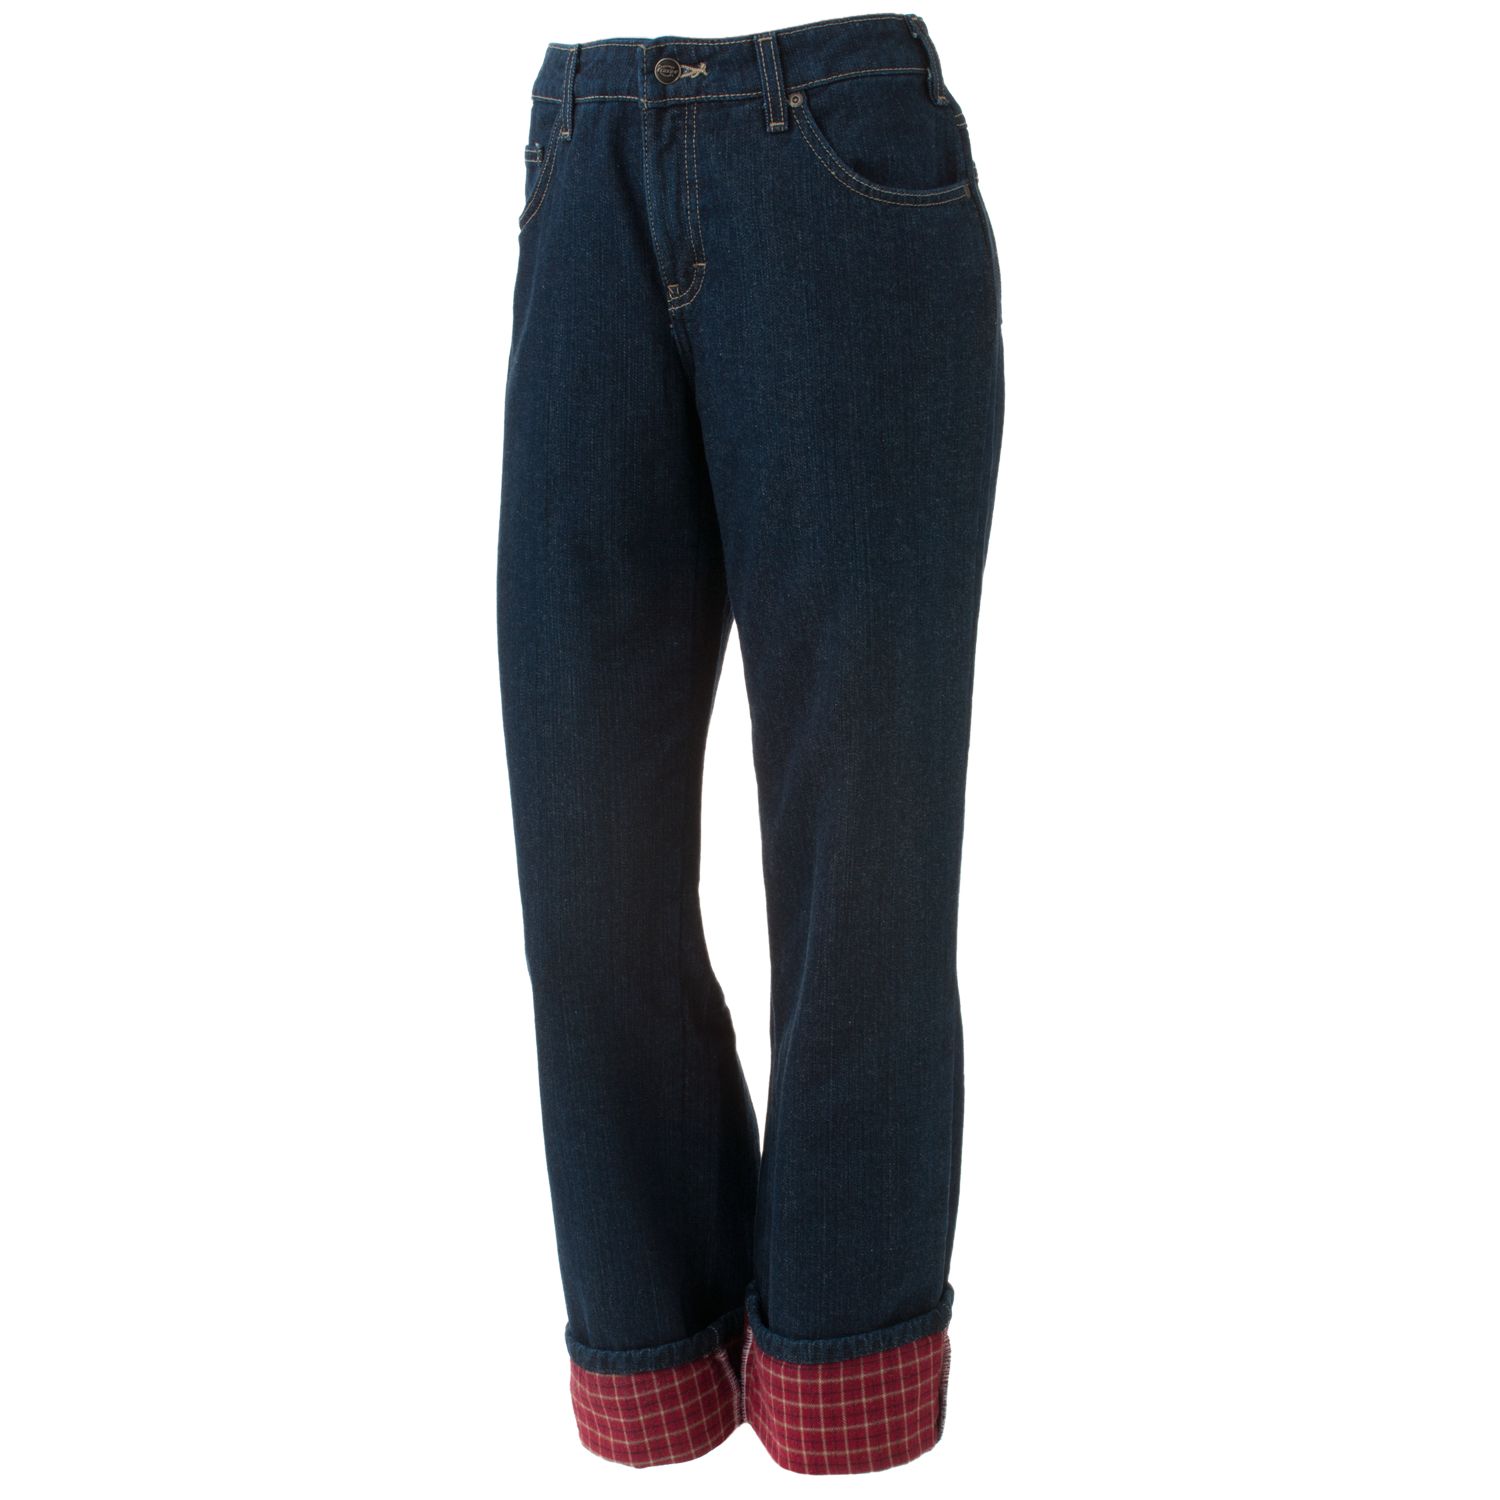 flannel lined jeans womens tall